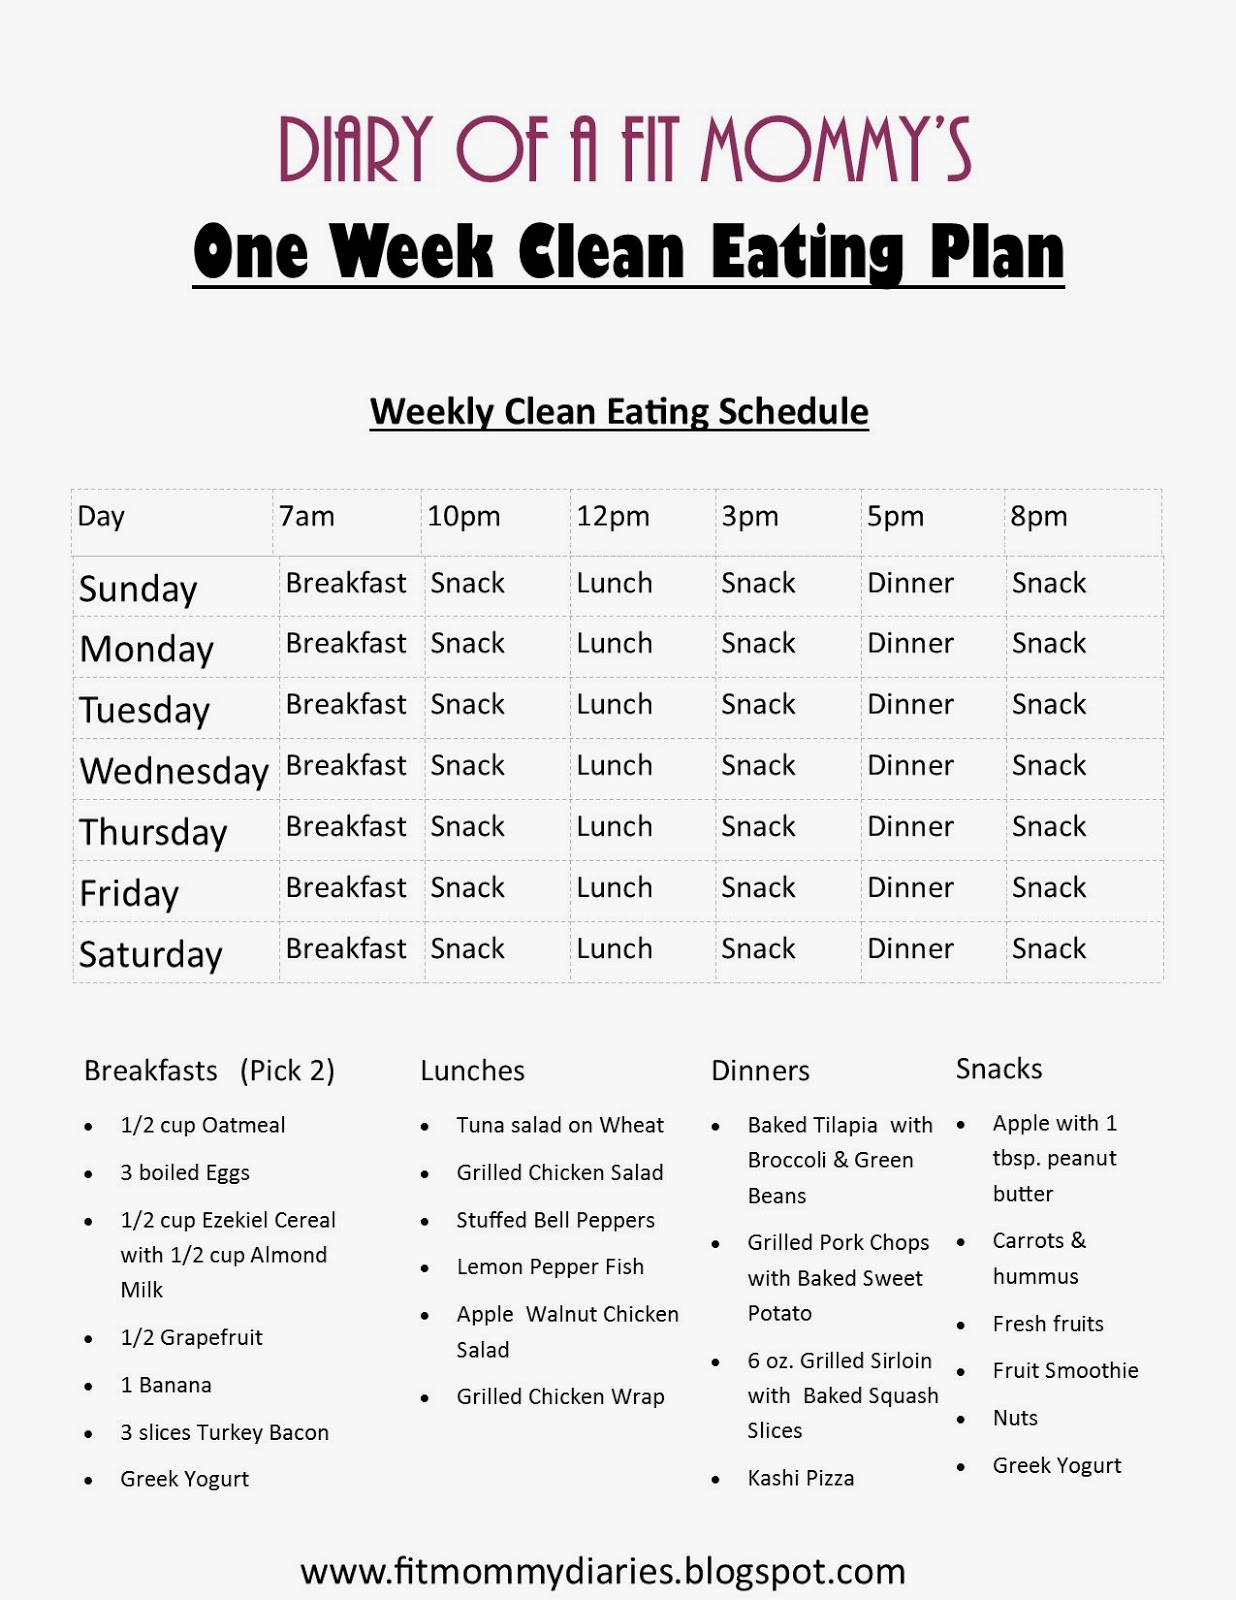 ... of a Fit Mommy: Diary of a Fit Mommy's One Week Clean Eating Plan